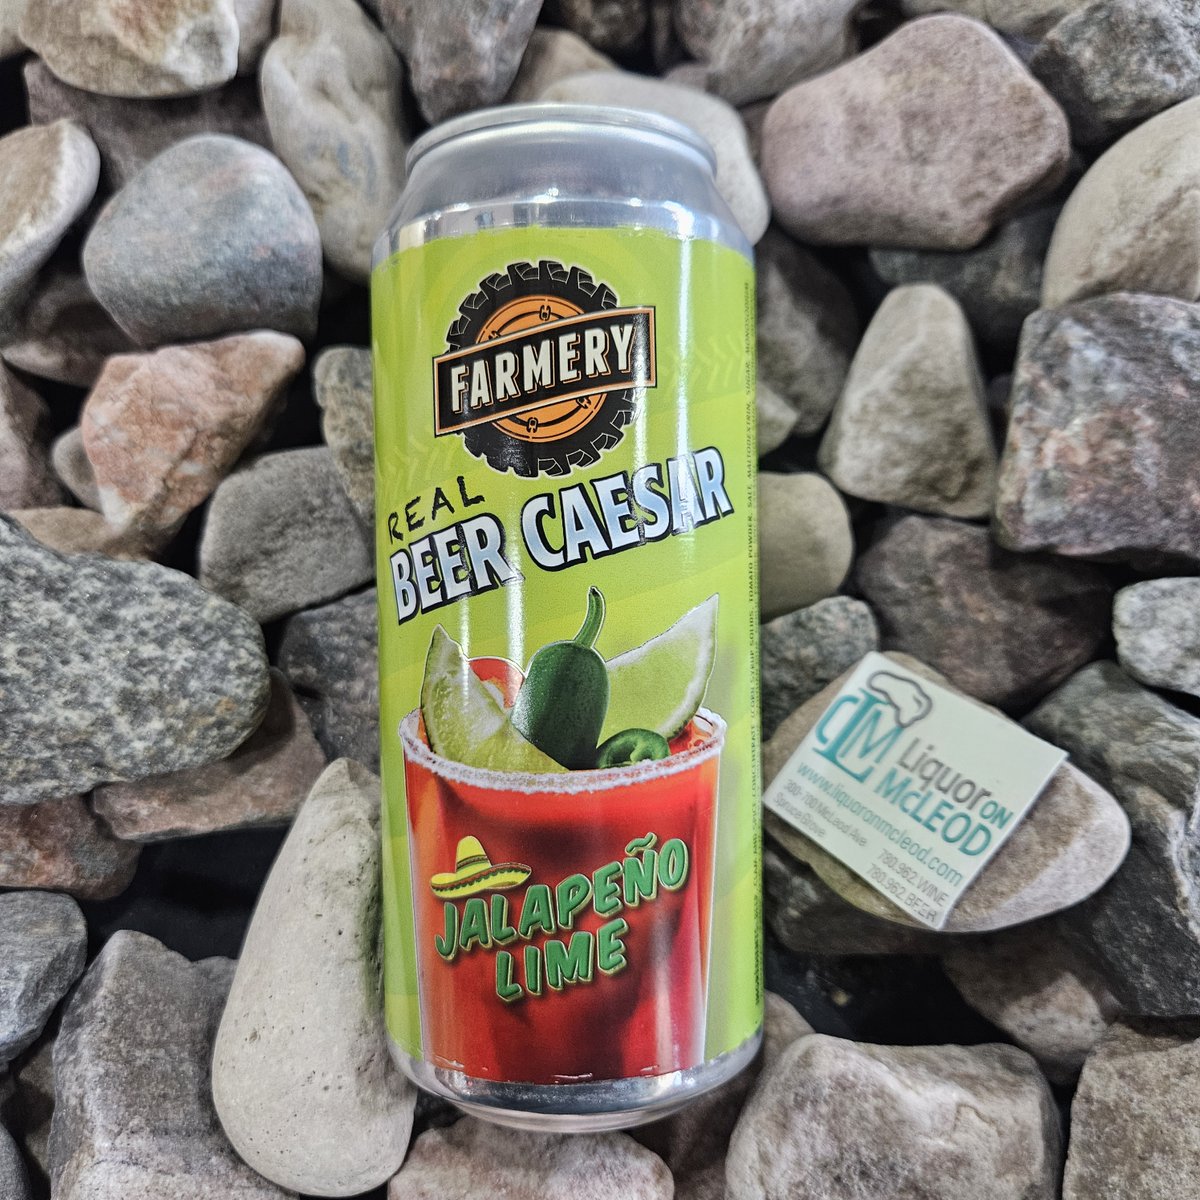 @Farmerybrewery Beer Caesar w/Jalapeno Lime A tasty blend of clam and spice flavors with jalapeno & lime for a zesty, refreshing kick.

#sprucegrove #stonyplain #liquoronmcleod #farmerybrewing